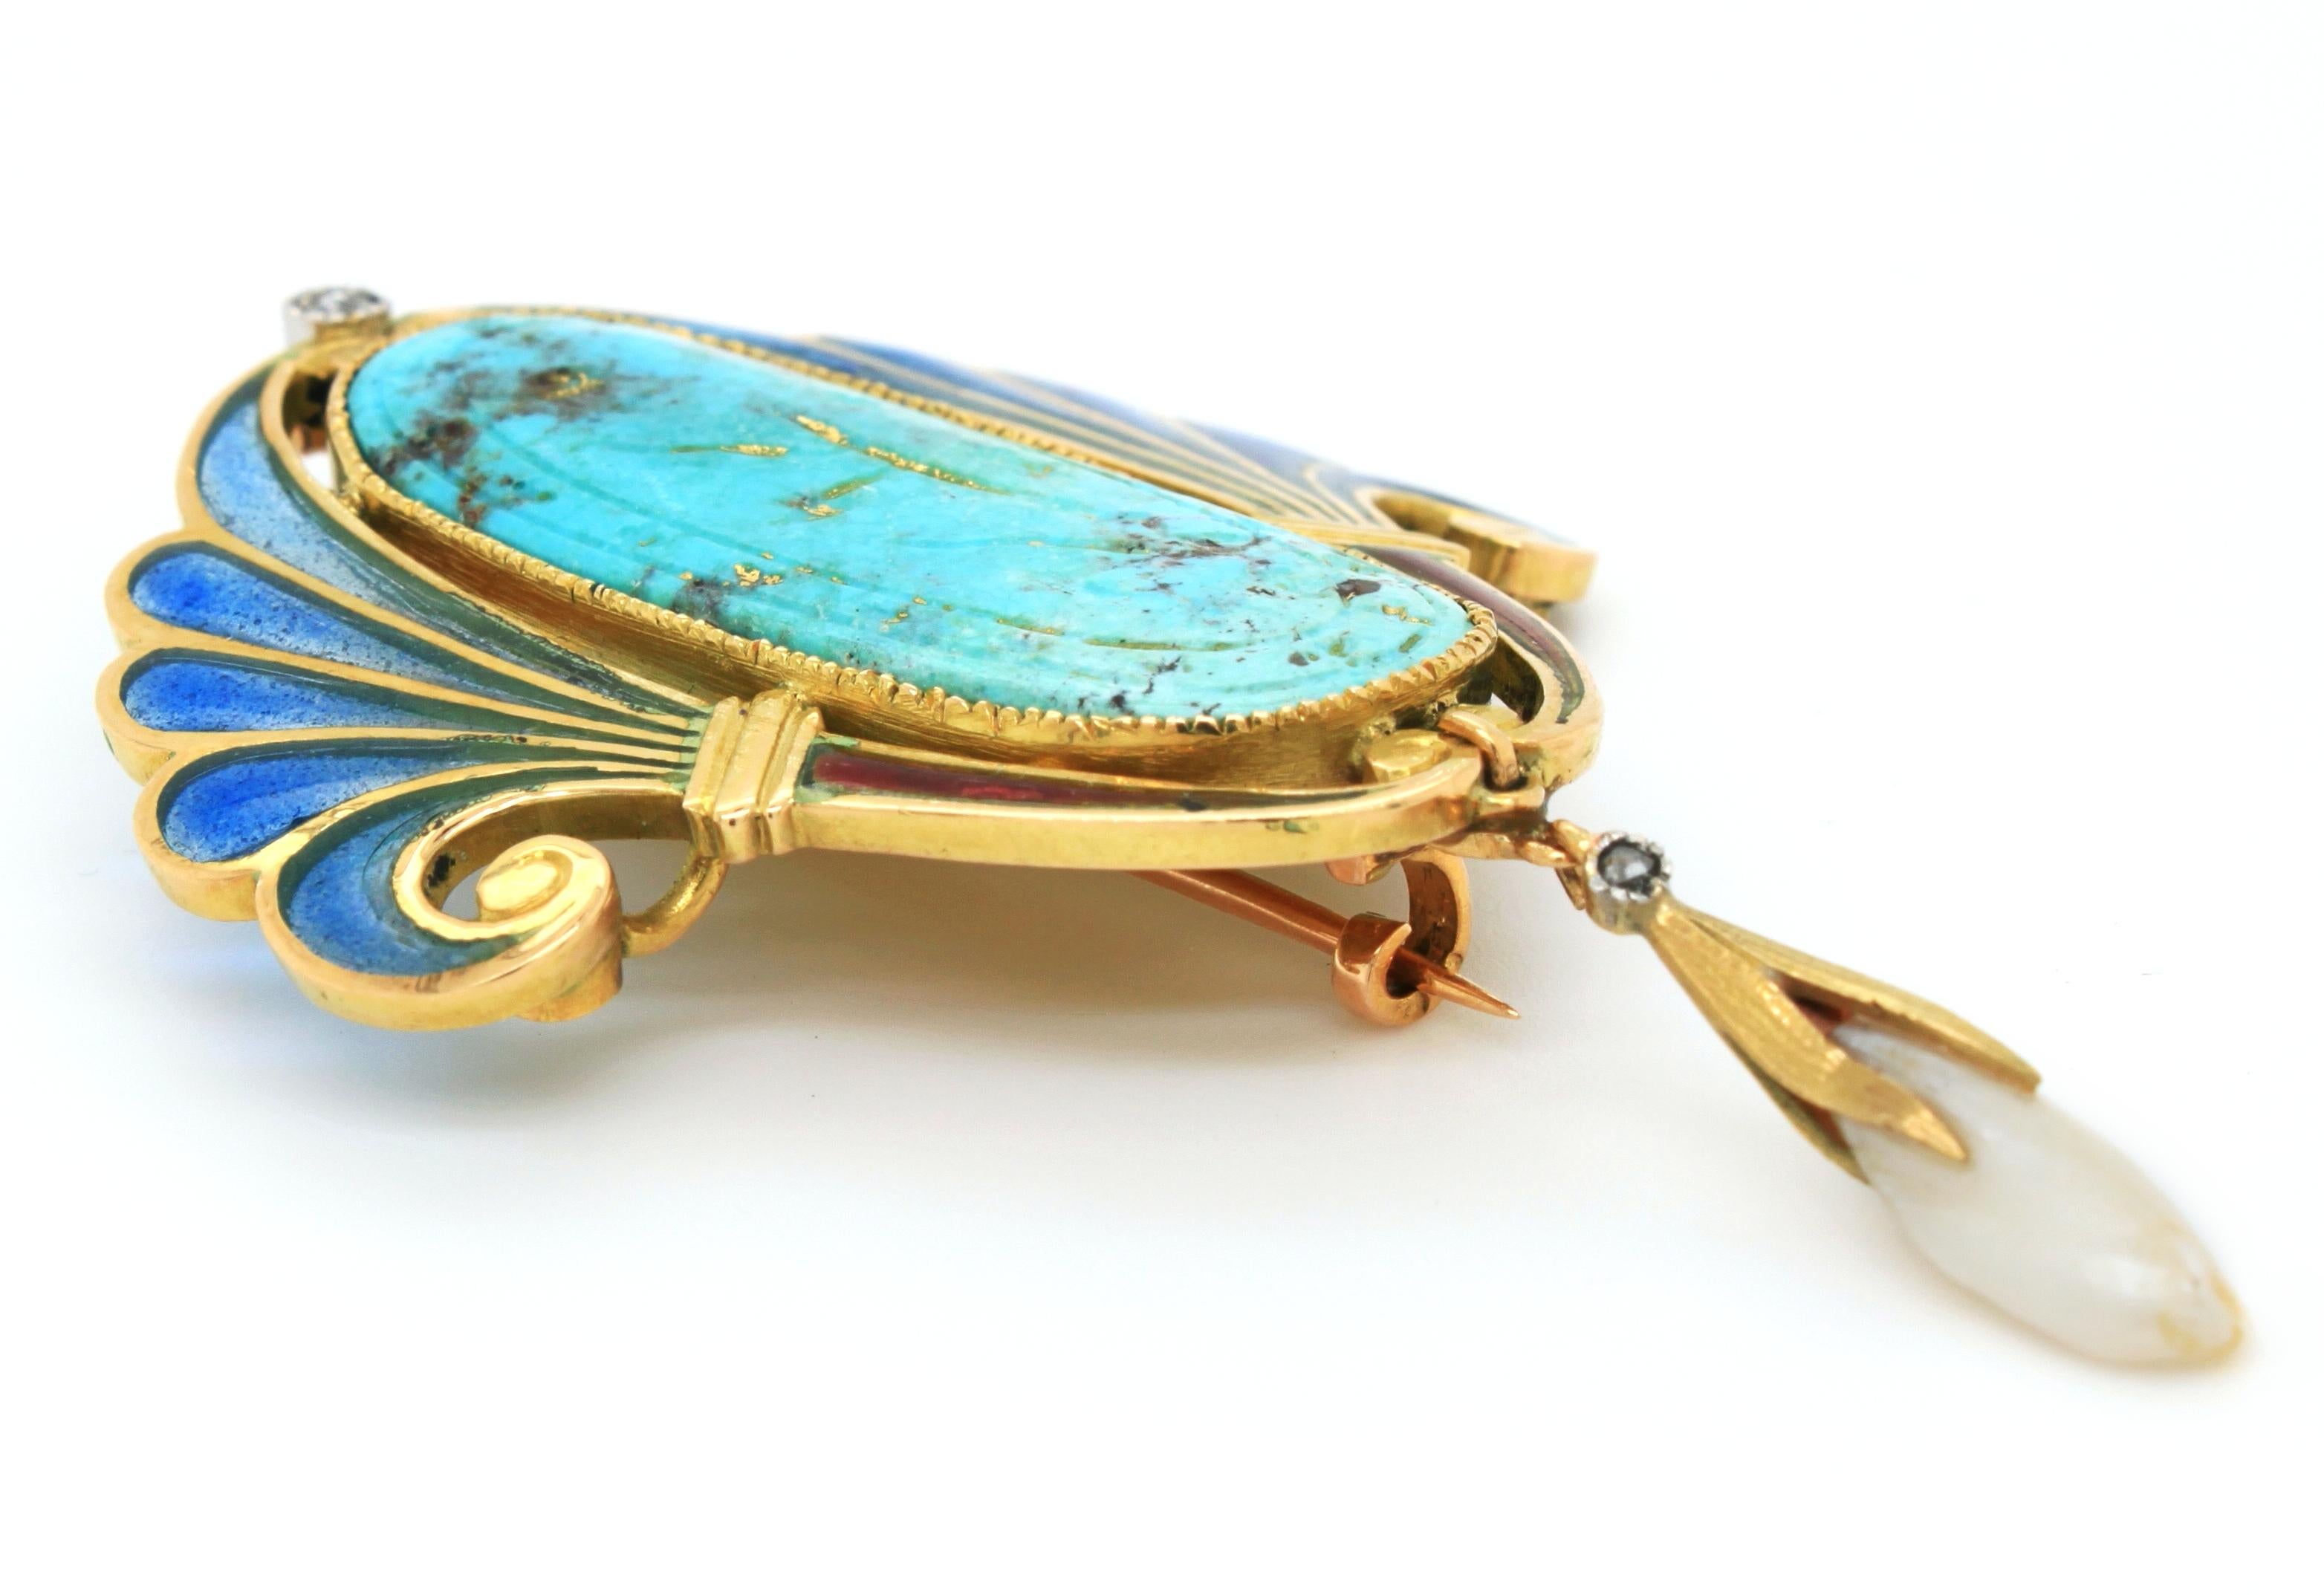 An Art Nouveau turquoise, pearl and diamond plique-a-jour enamel brooch, ca. 1900s. The brooch, has an impressive antique turquoise in the centre, with decorative gold carvings. As was popular in the Art Nouveau period, it is surrounded by beautiful